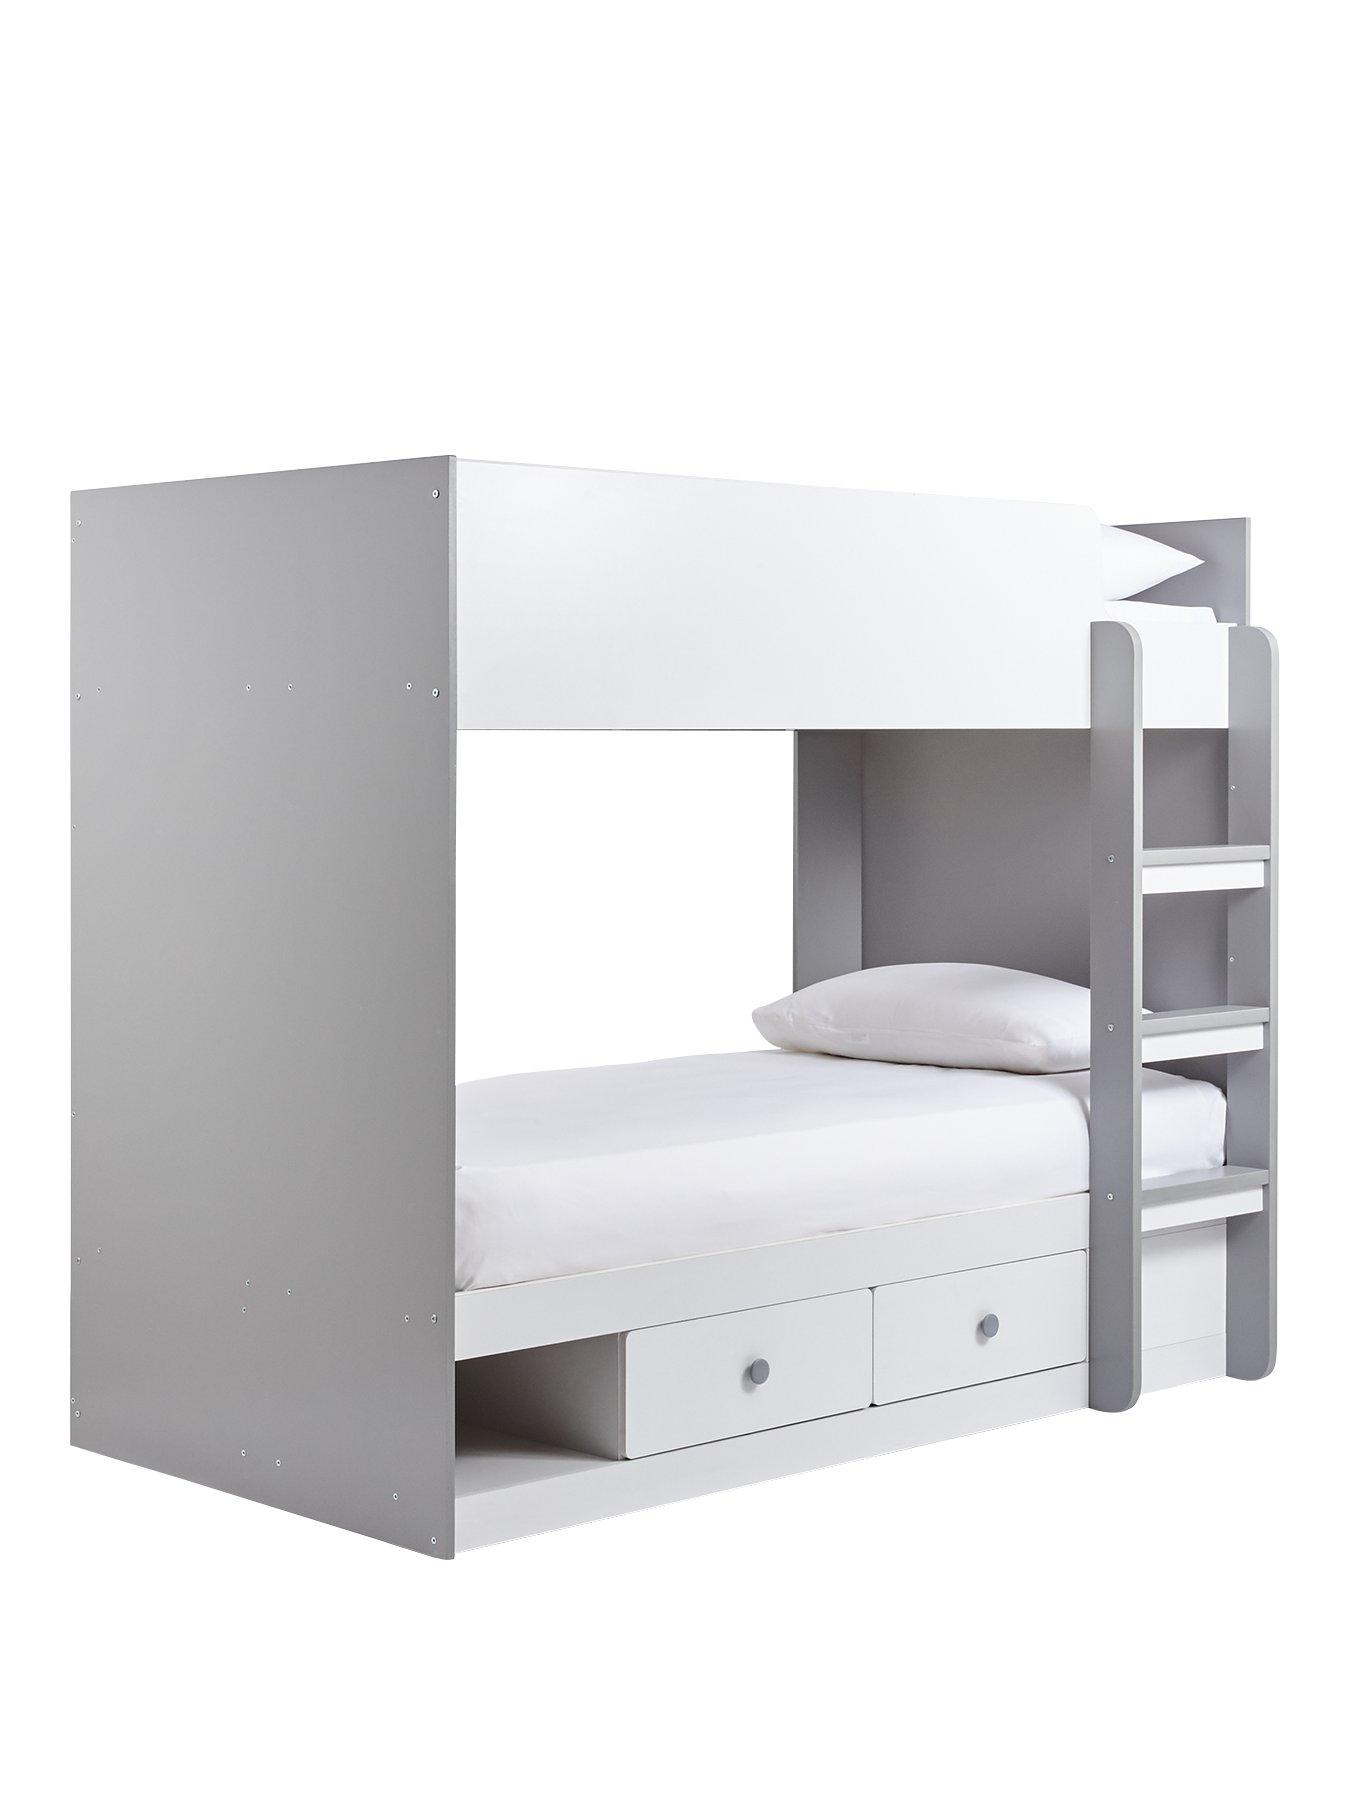 Peyton Storage Bunk Bed With Mattress Options Buy And Save Whitegrey - bunk bed roblox